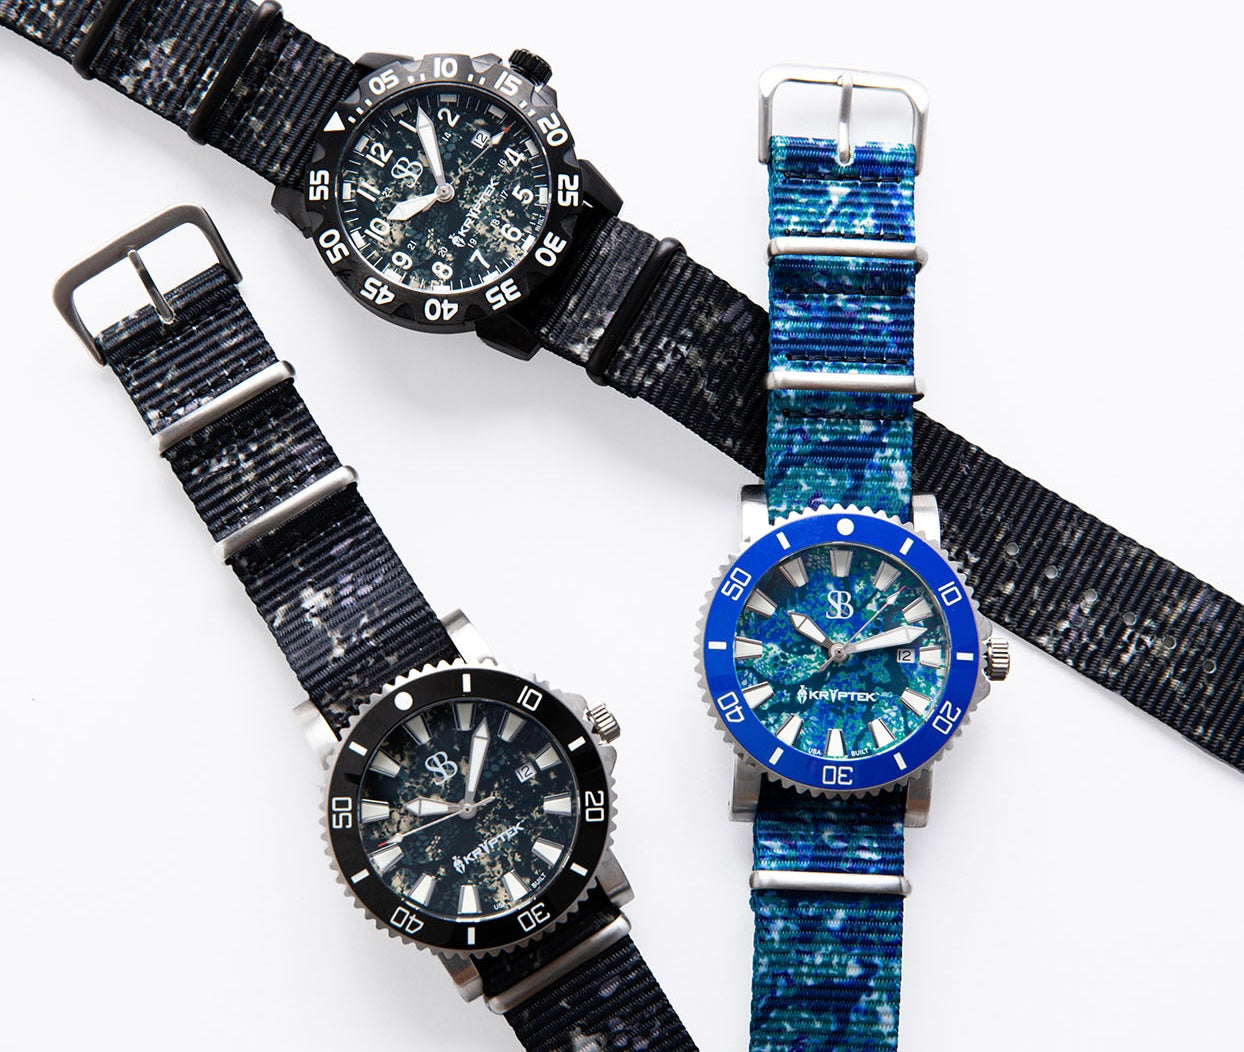 Kryptek and S&B Watches partner to release two new Obskura camouflage watches.